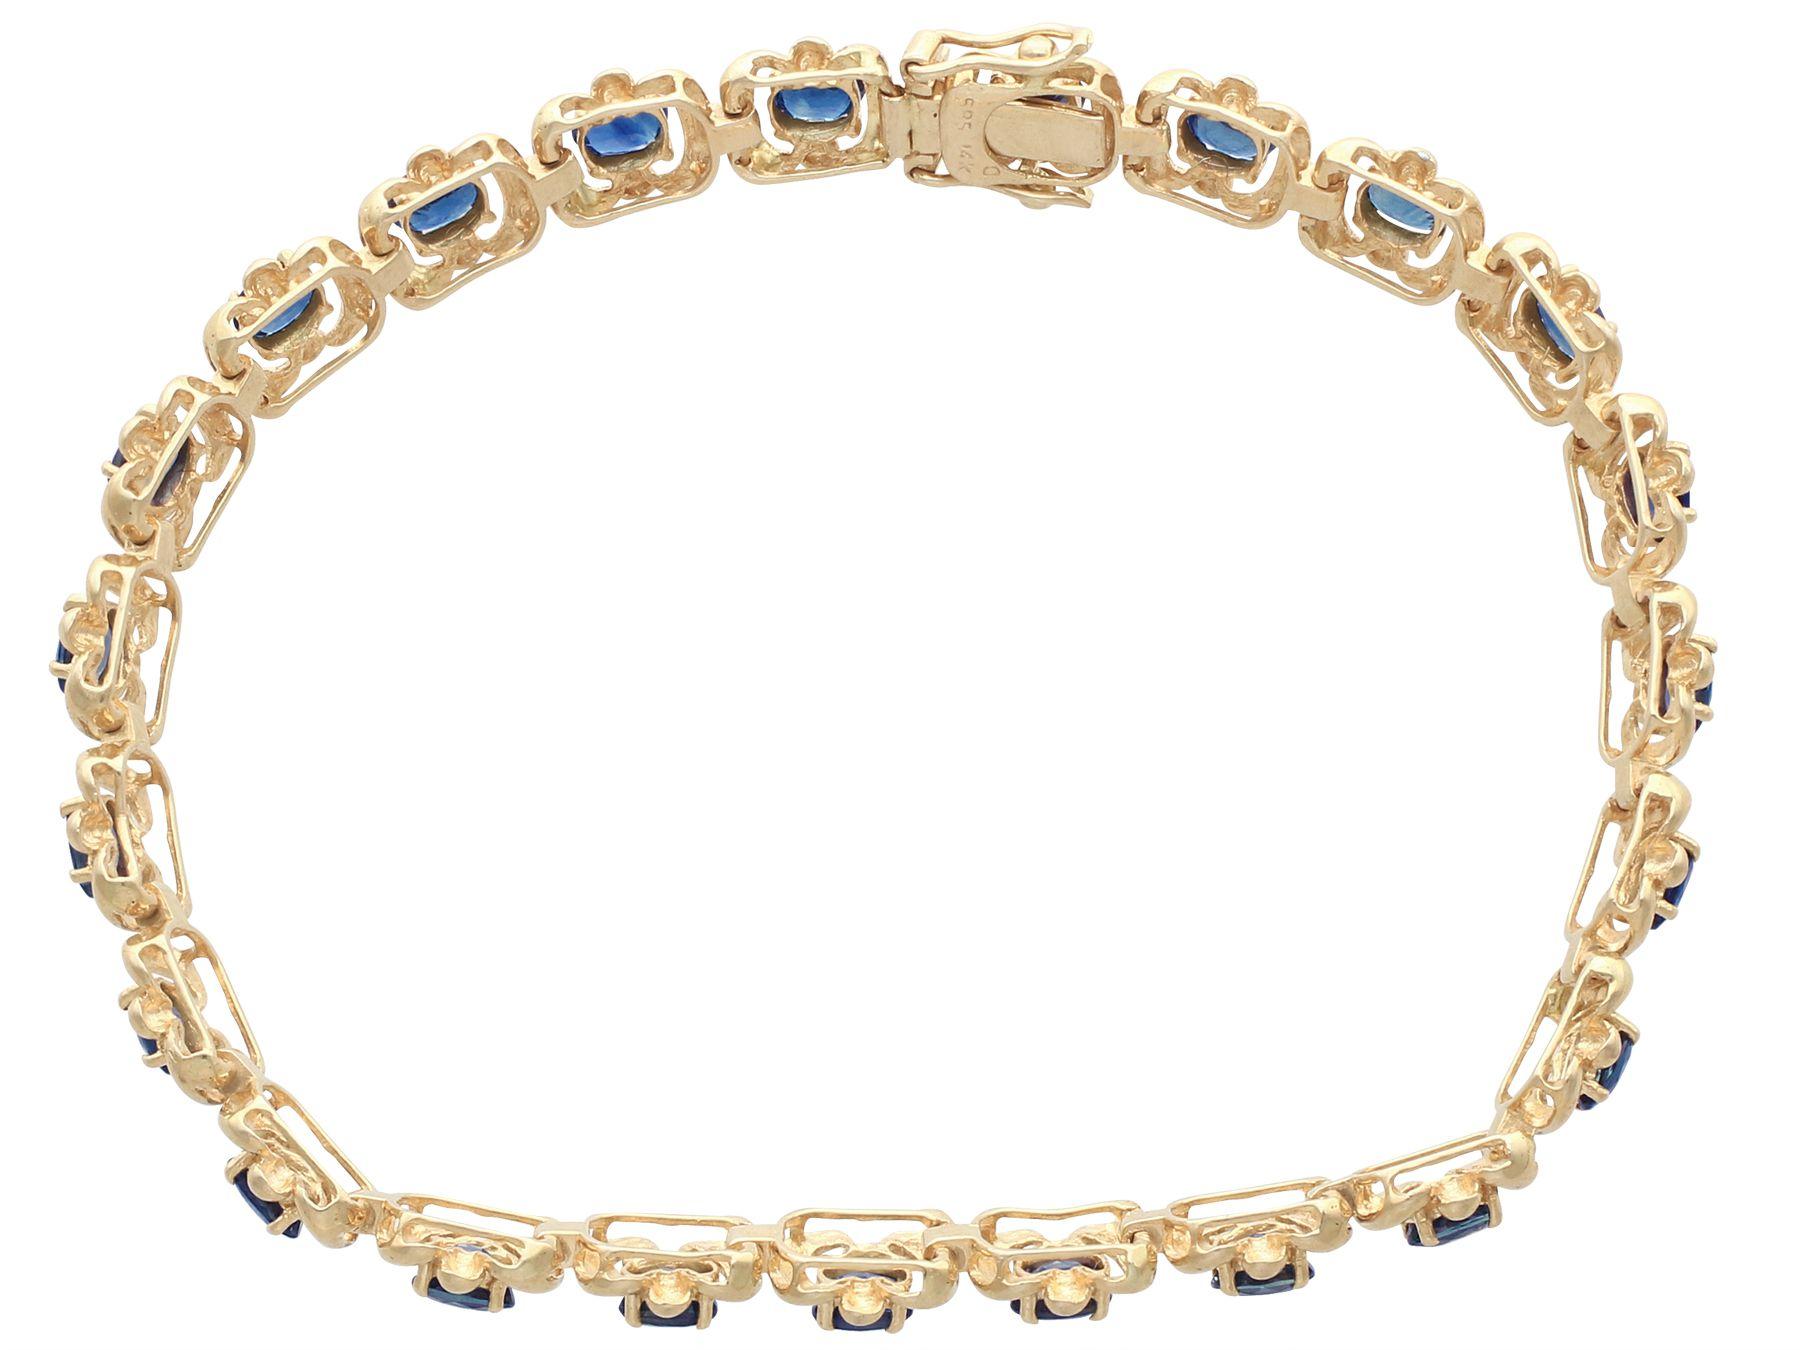 A fine and impressive vintage European 4.60 Carat blue sapphire and 14 karat yellow gold bracelet; part of our diverse vintage jewelry collections

This fine and impressive blue sapphire bracelet has been crafted in 14k yellow gold.

The bracelet